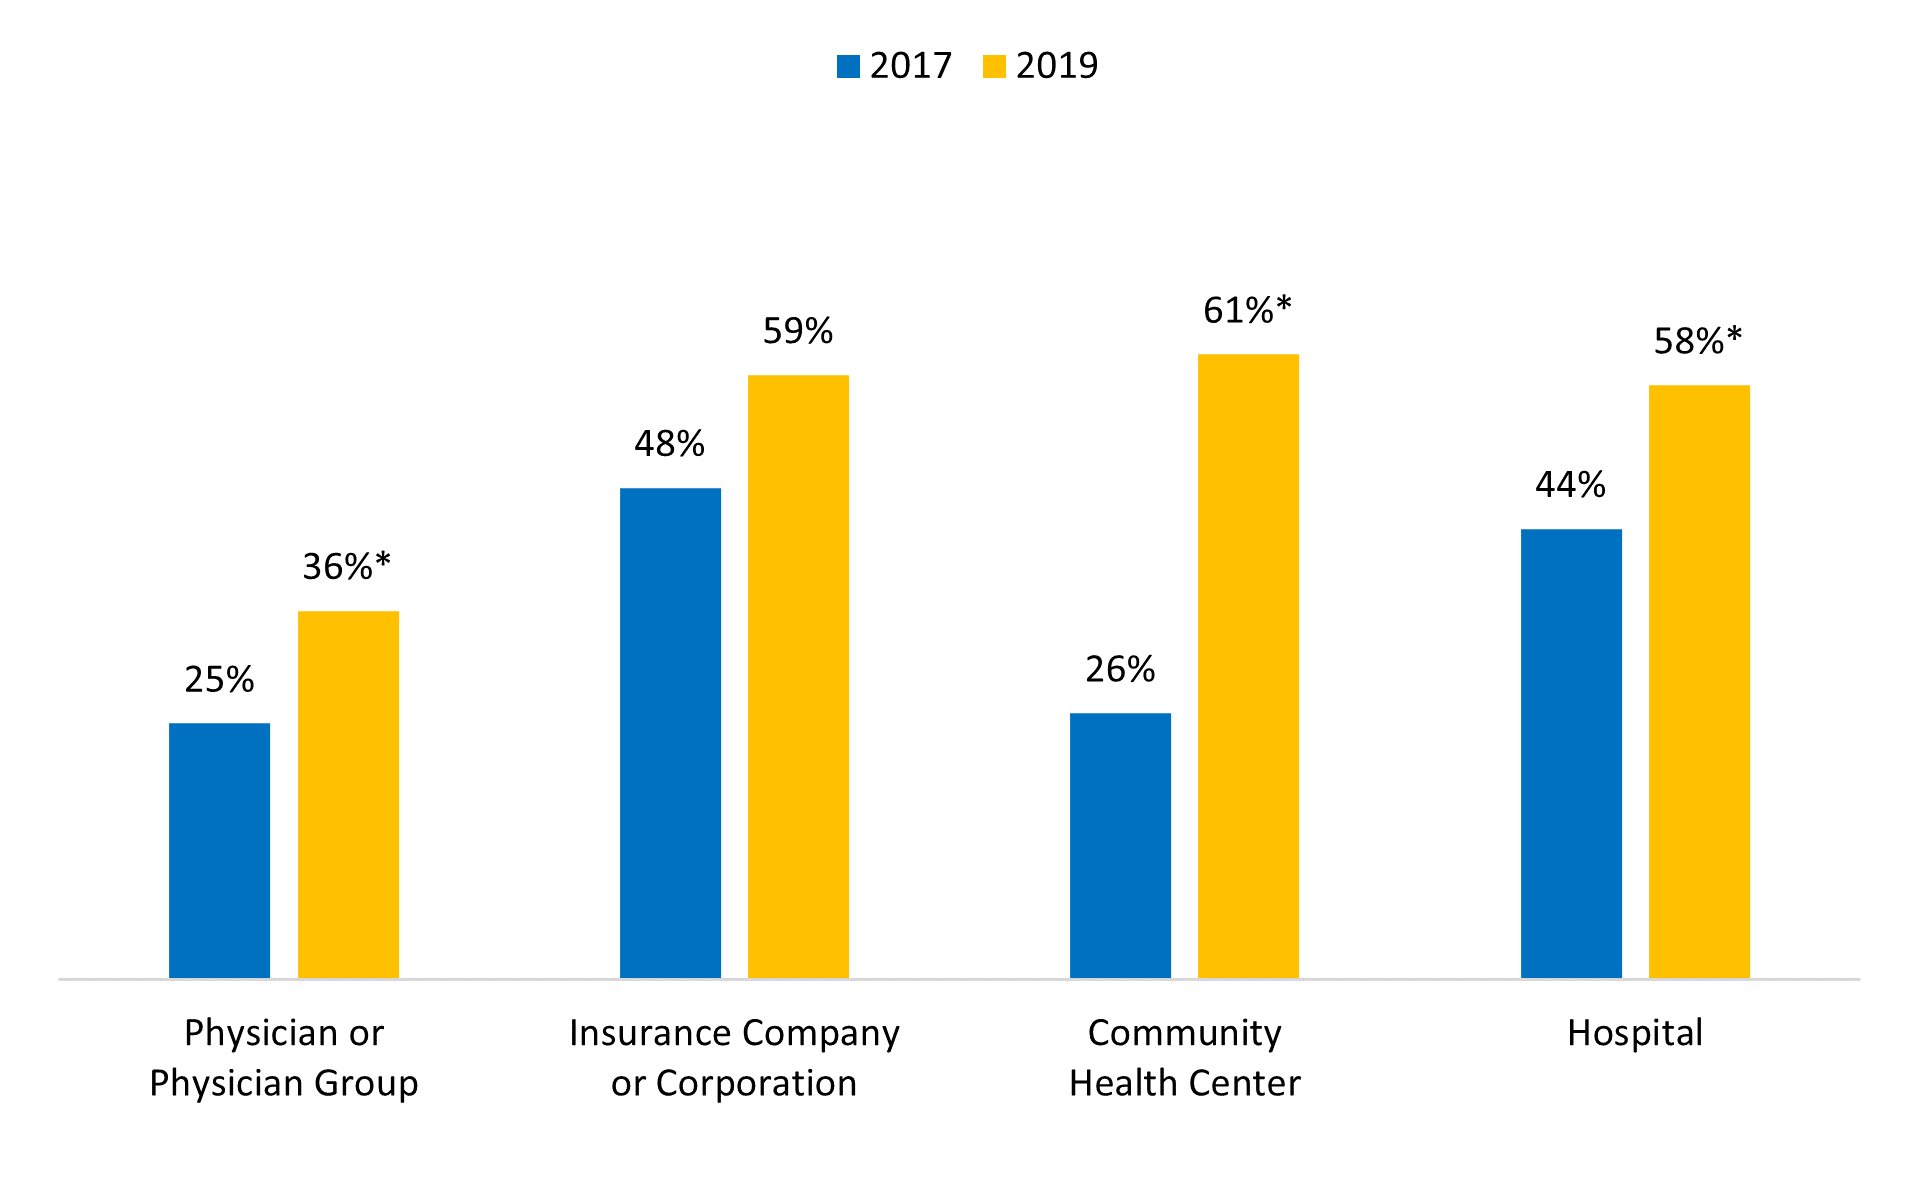 Figure 3: Percent of office-based physicians that use EPCS technology by practice ownership, 2017-2019.